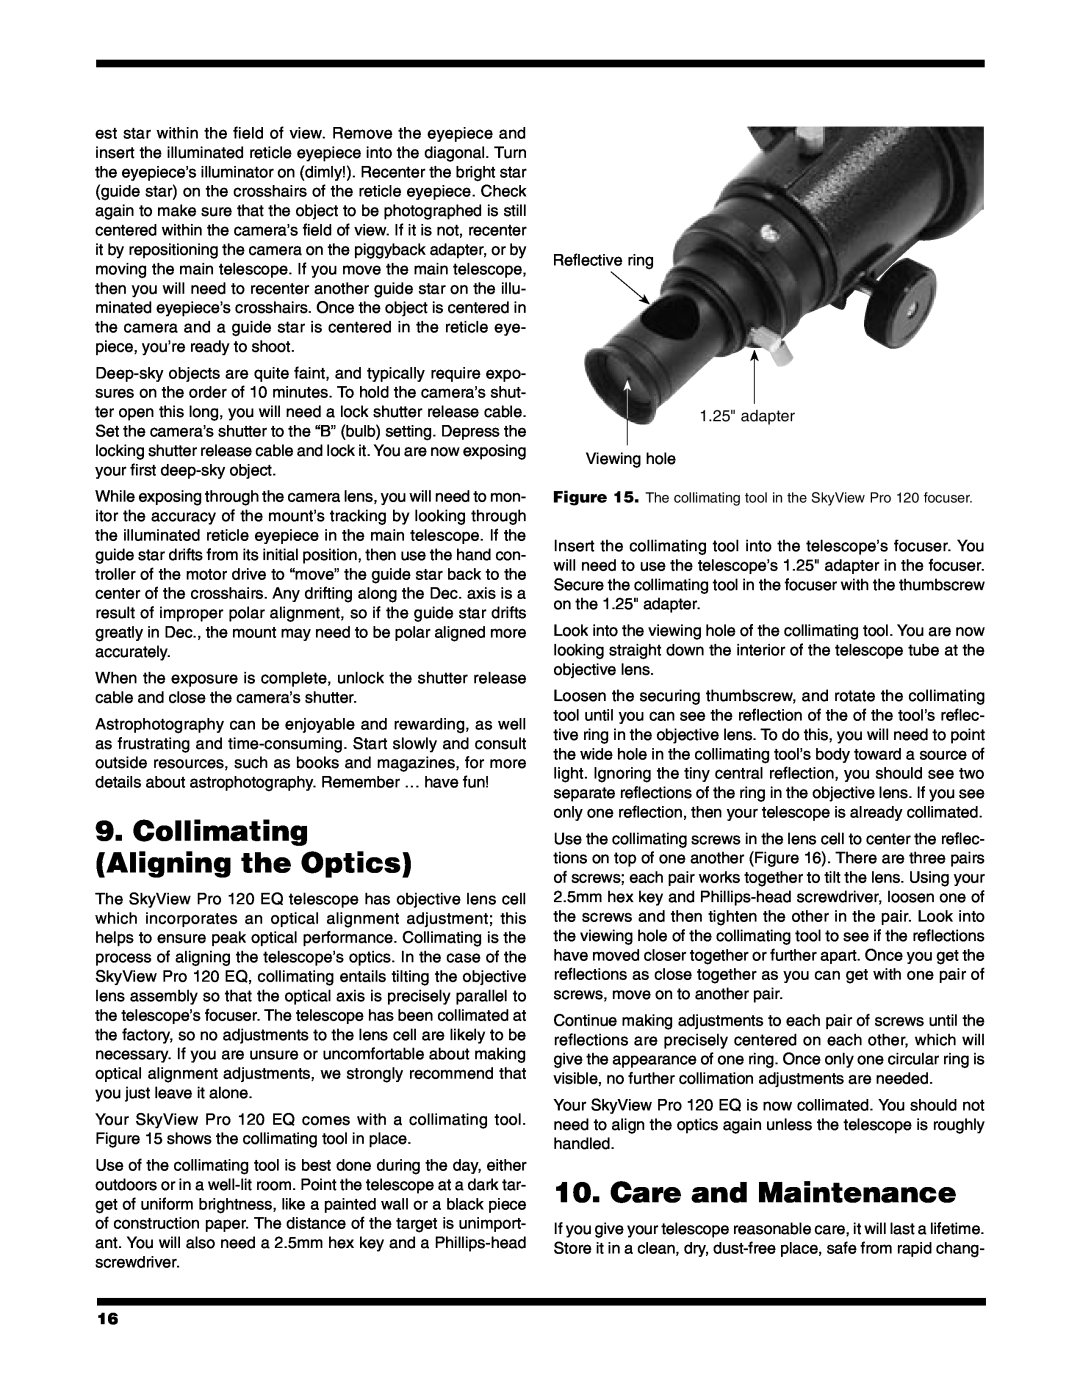 Orion PRO 120 EQ instruction manual Collimating Aligning the Optics, Care and Maintenance 